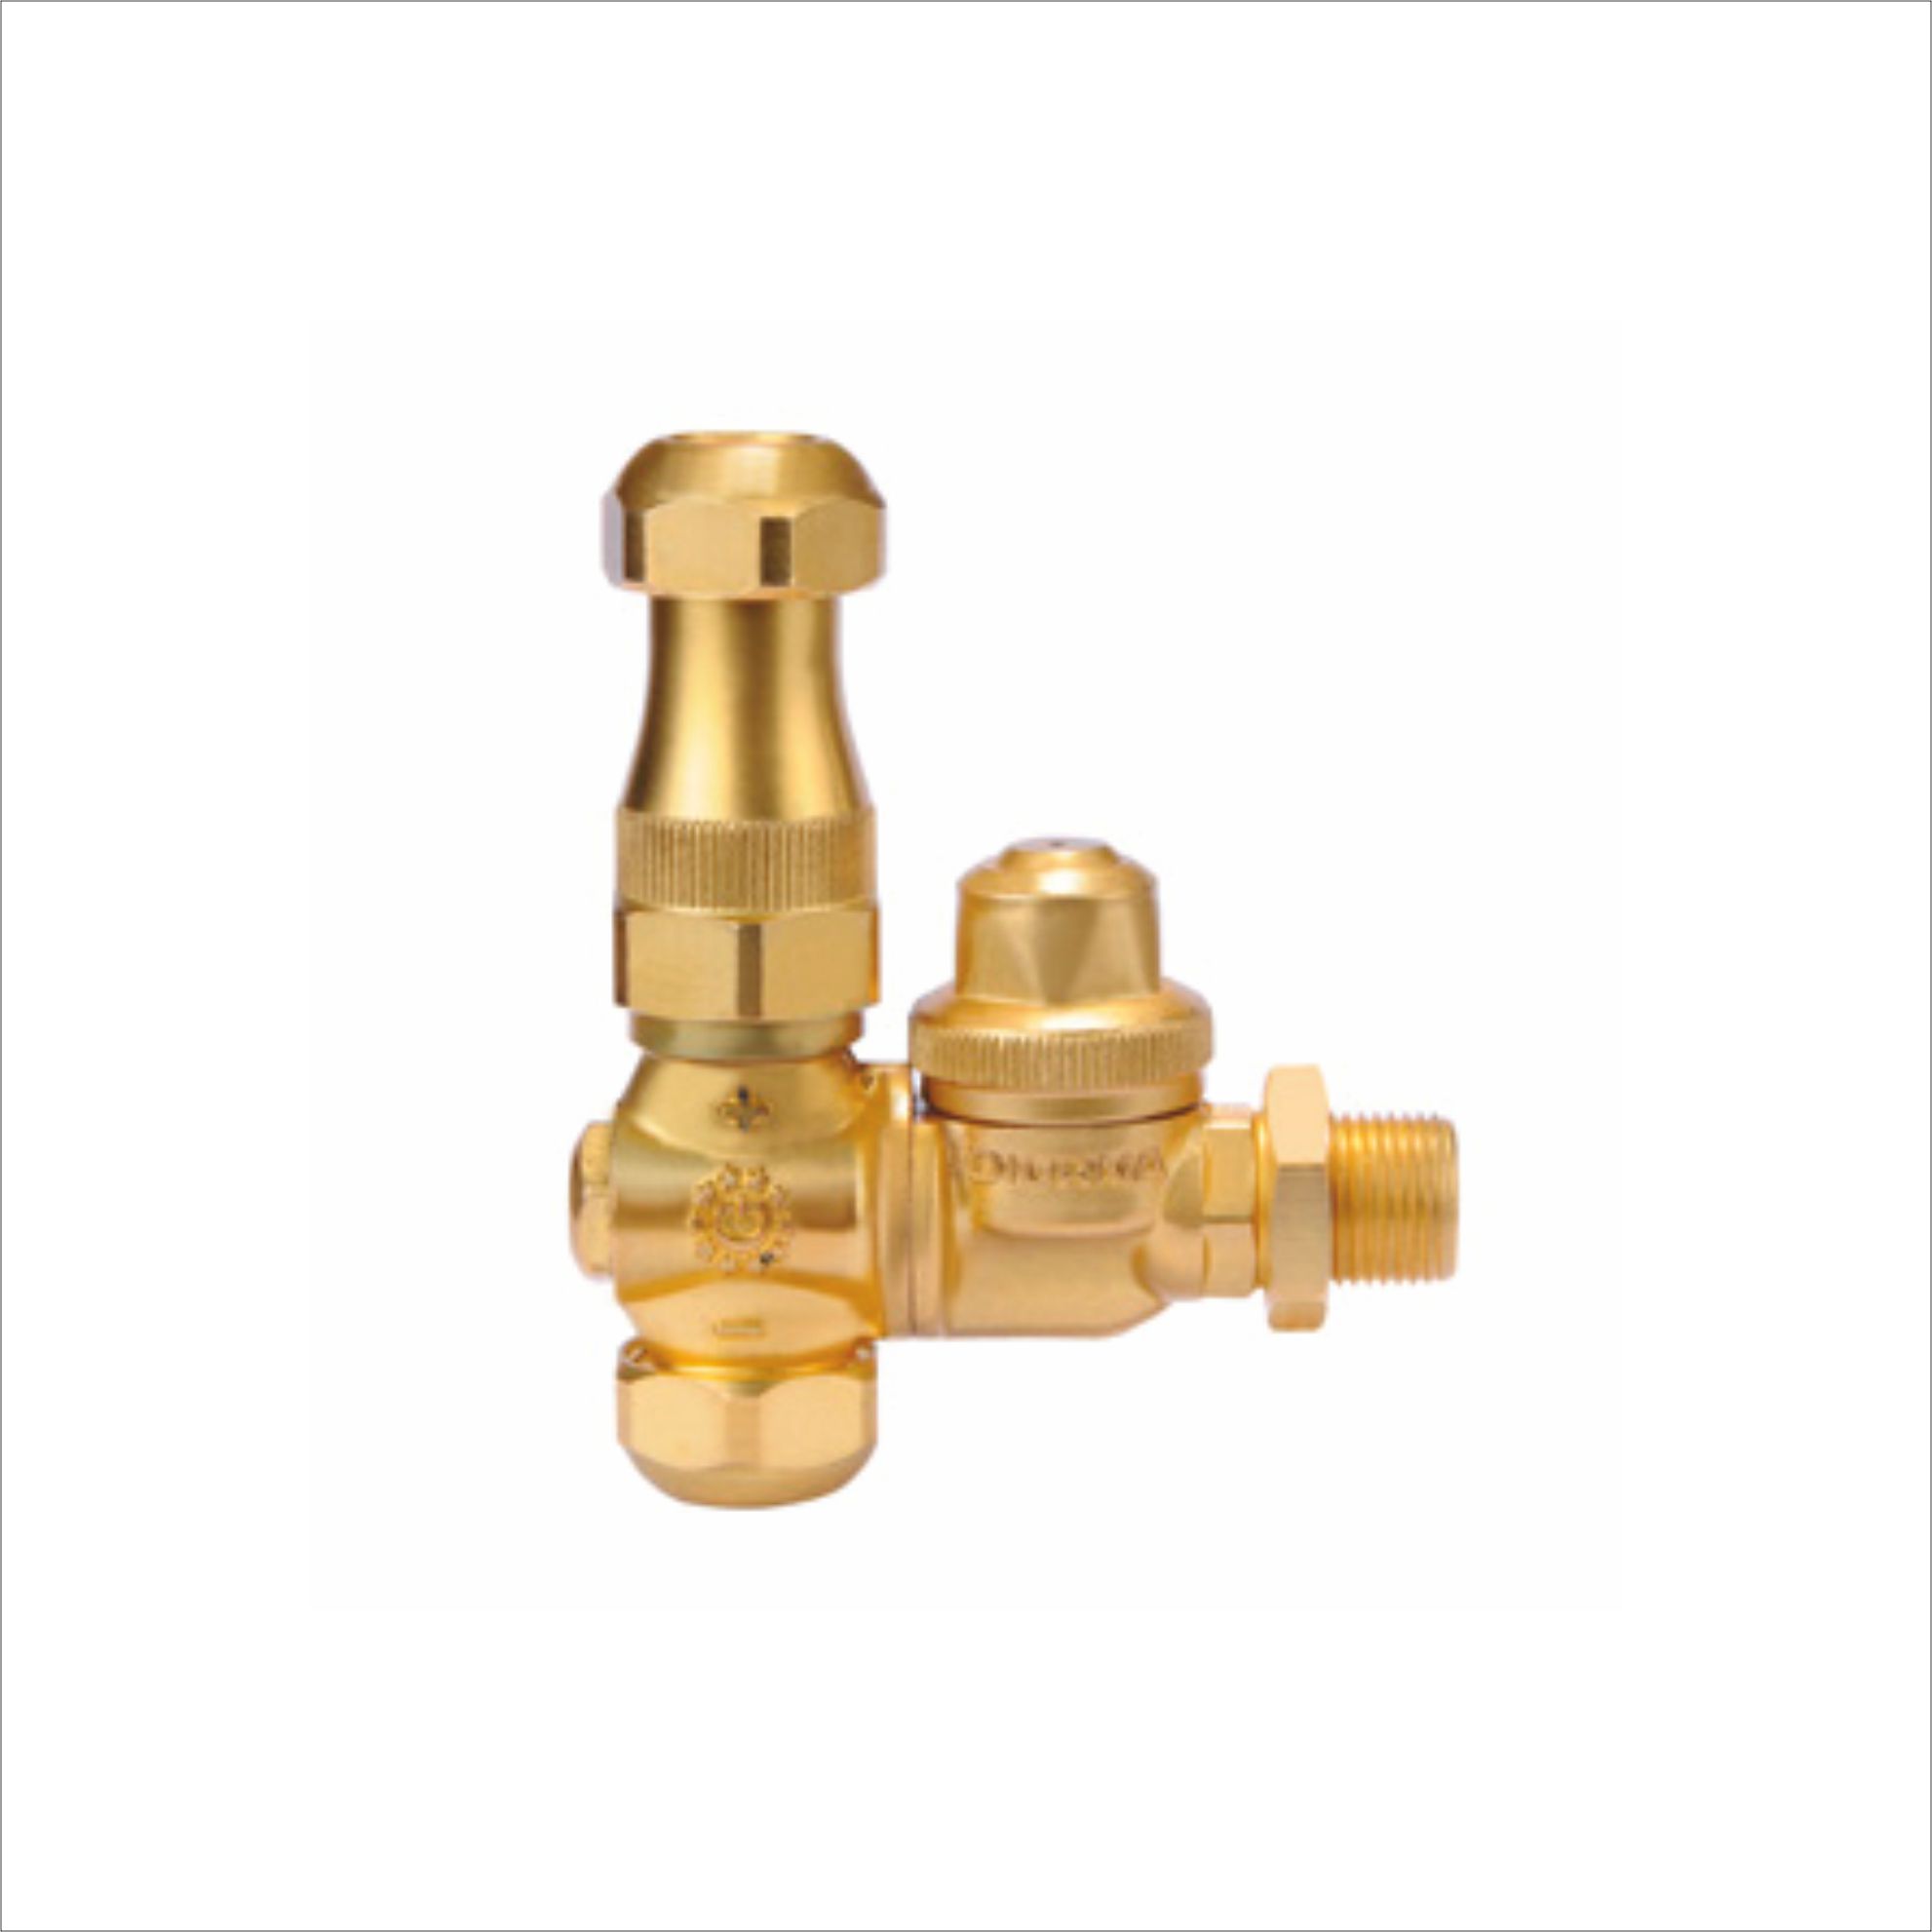 ADJUSTABLE BRASS NOZZLE FOR MISTBLOWER (WITH DIAPHRAGM CHECK VALVE)